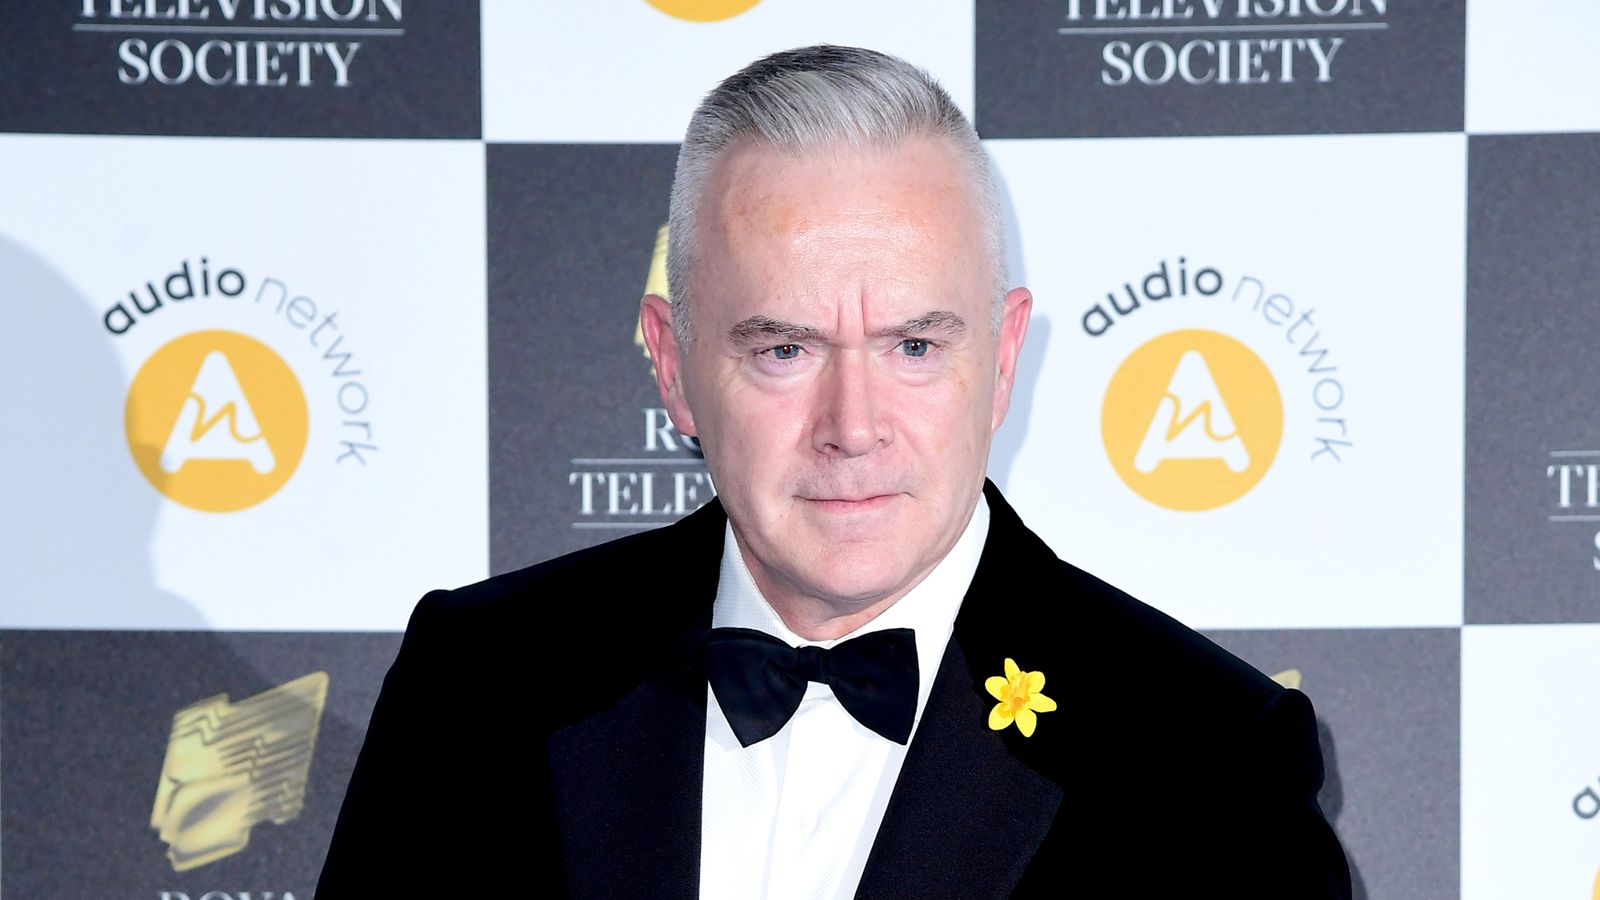 'No criminal offence' in allegations against BBC presenter Huw Edwards, says Met Police